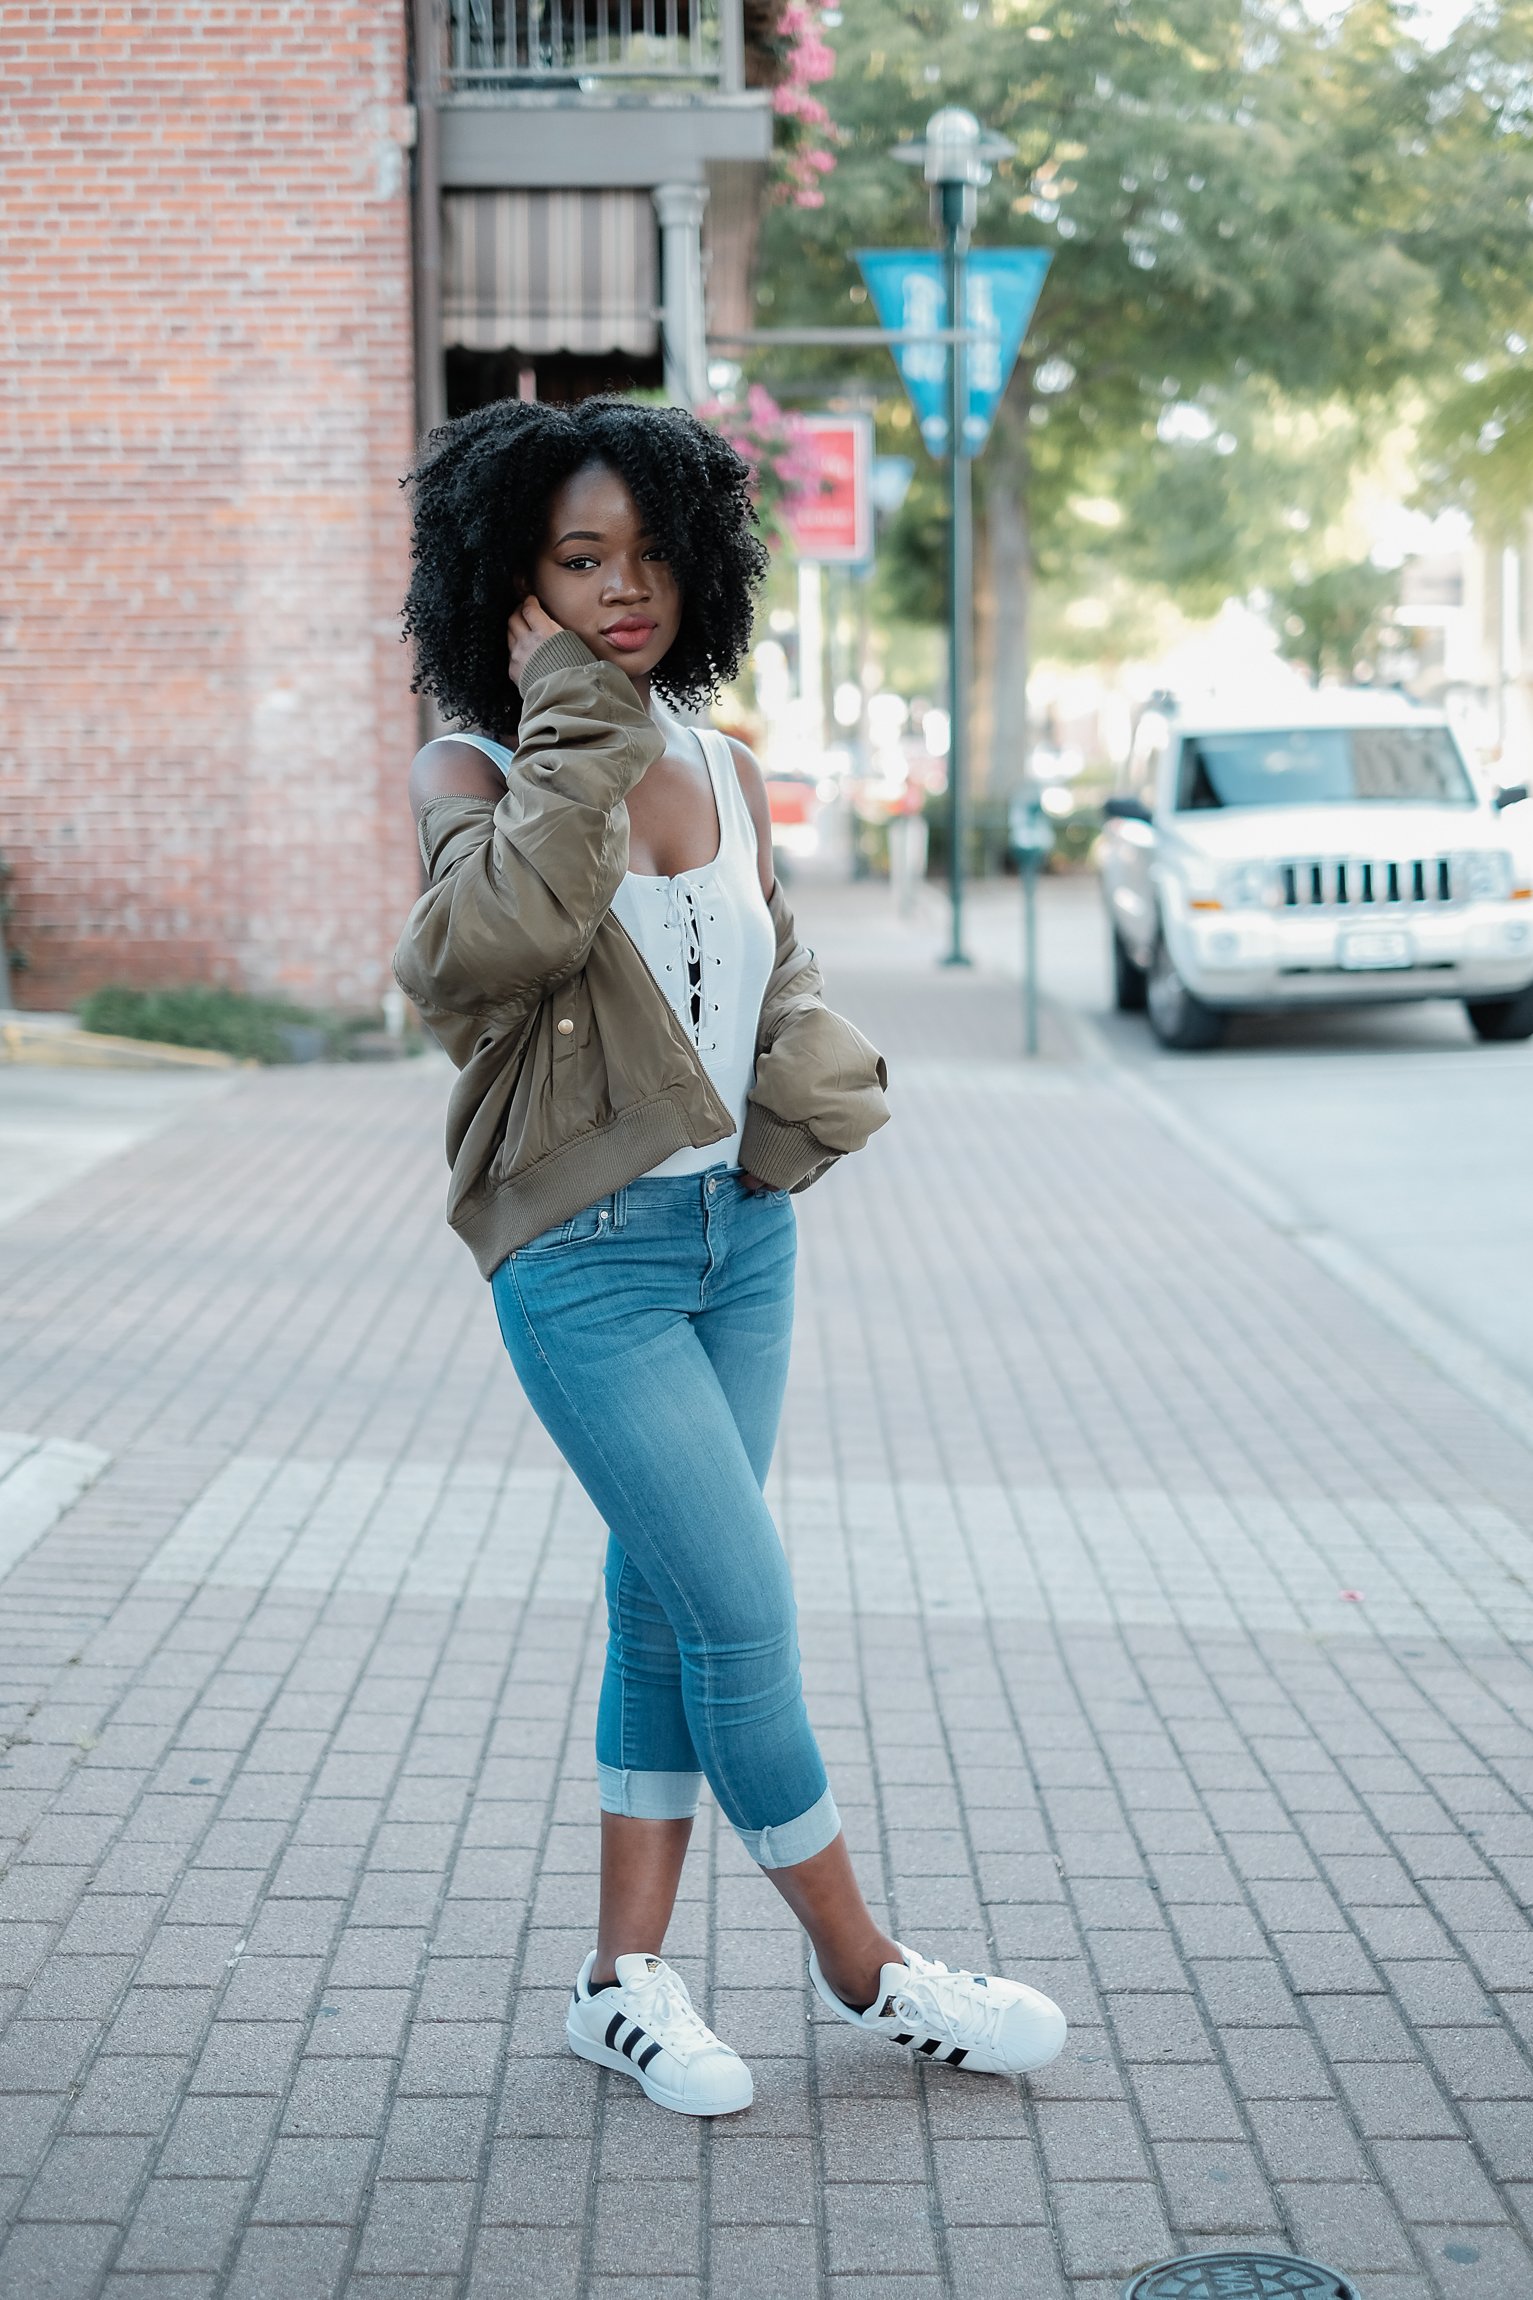 black girl in blue jeans and white top